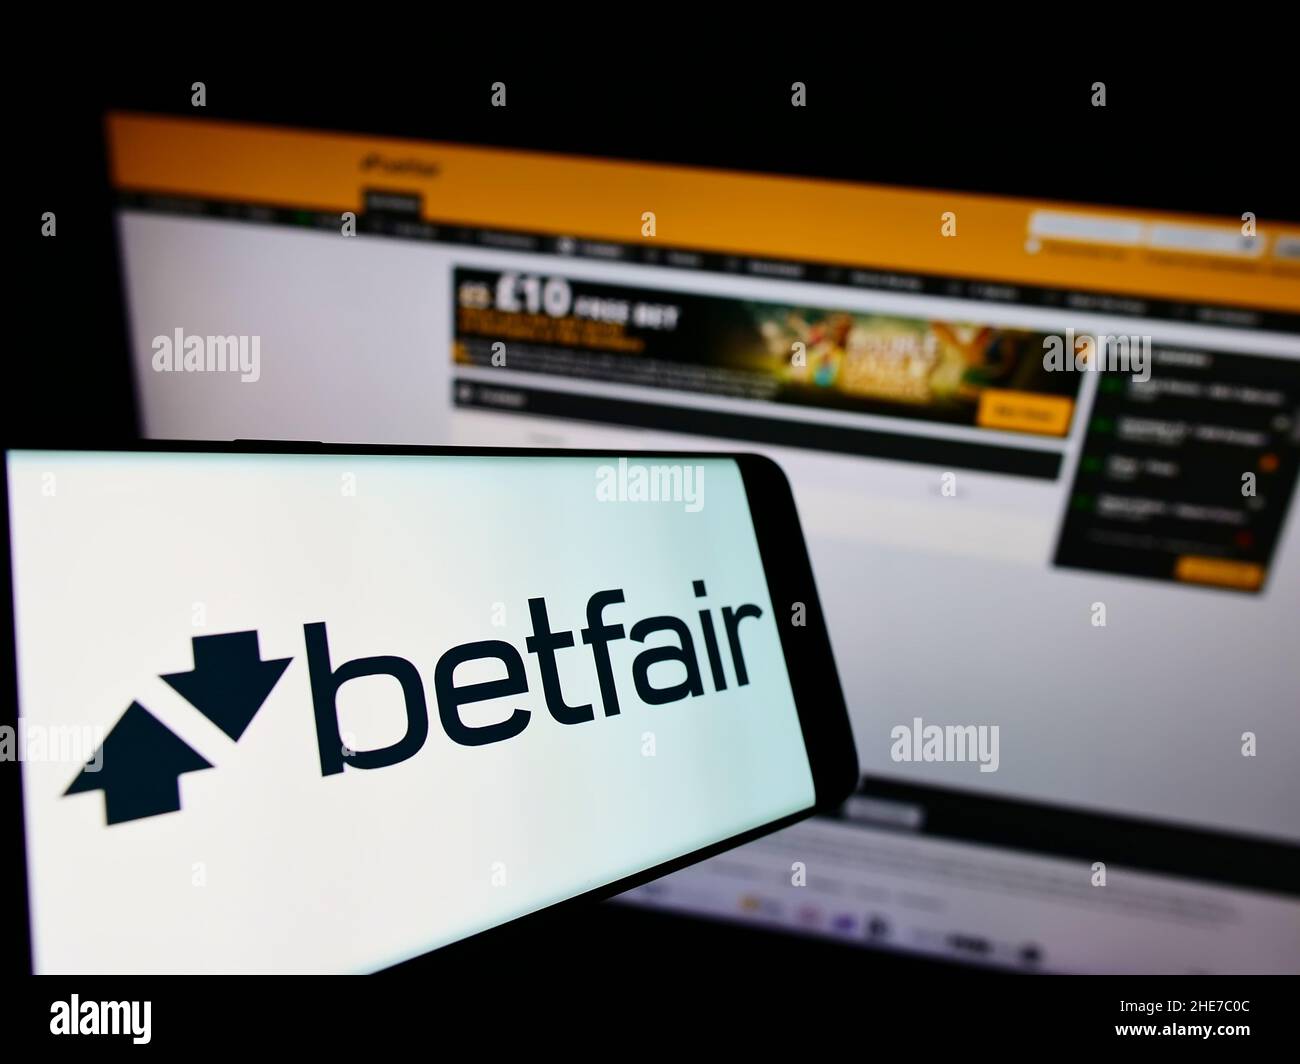 Mobile phone with logo of British online gambling company Betfair on screen in front of business website. Focus on center-right of phone display. Stock Photo